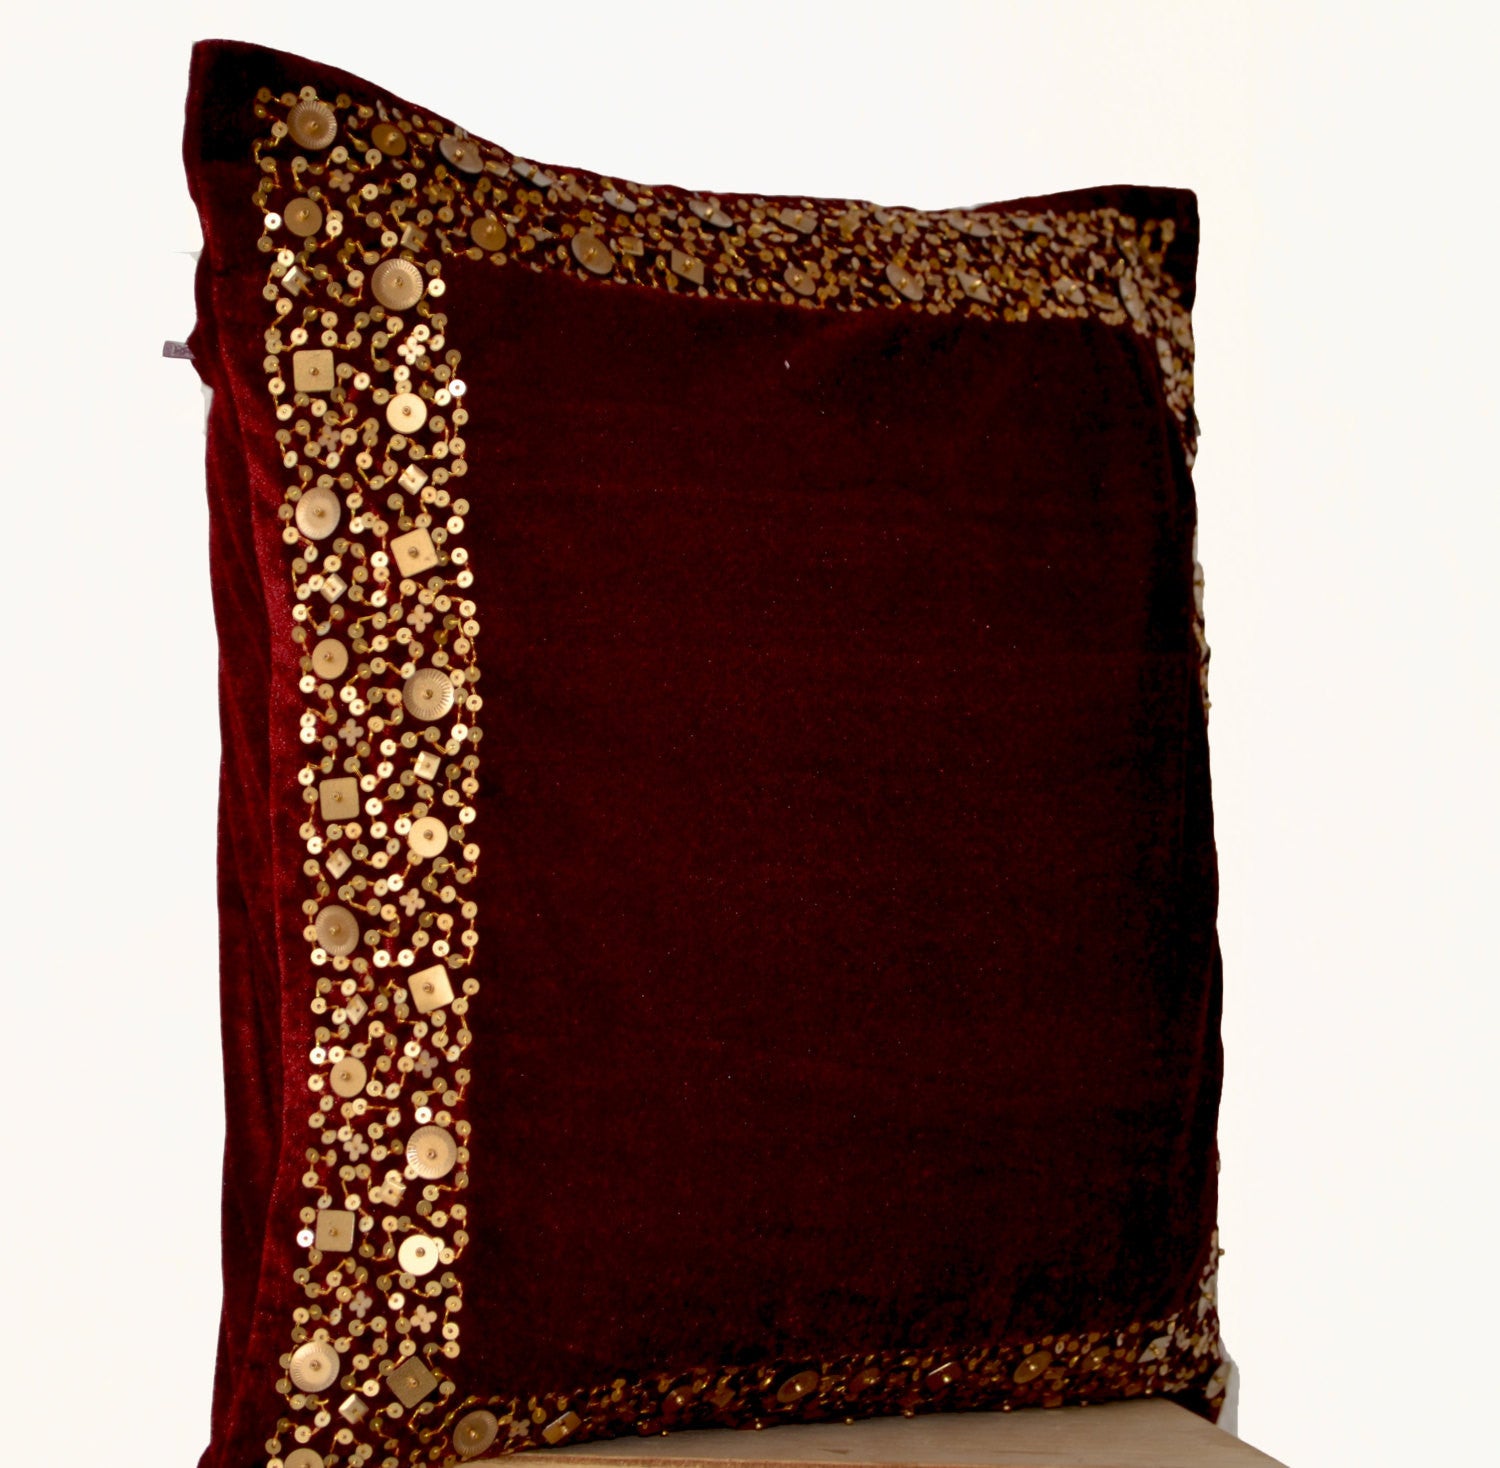 Handmade maroon velvet throw pillows with gold sequin border and beads